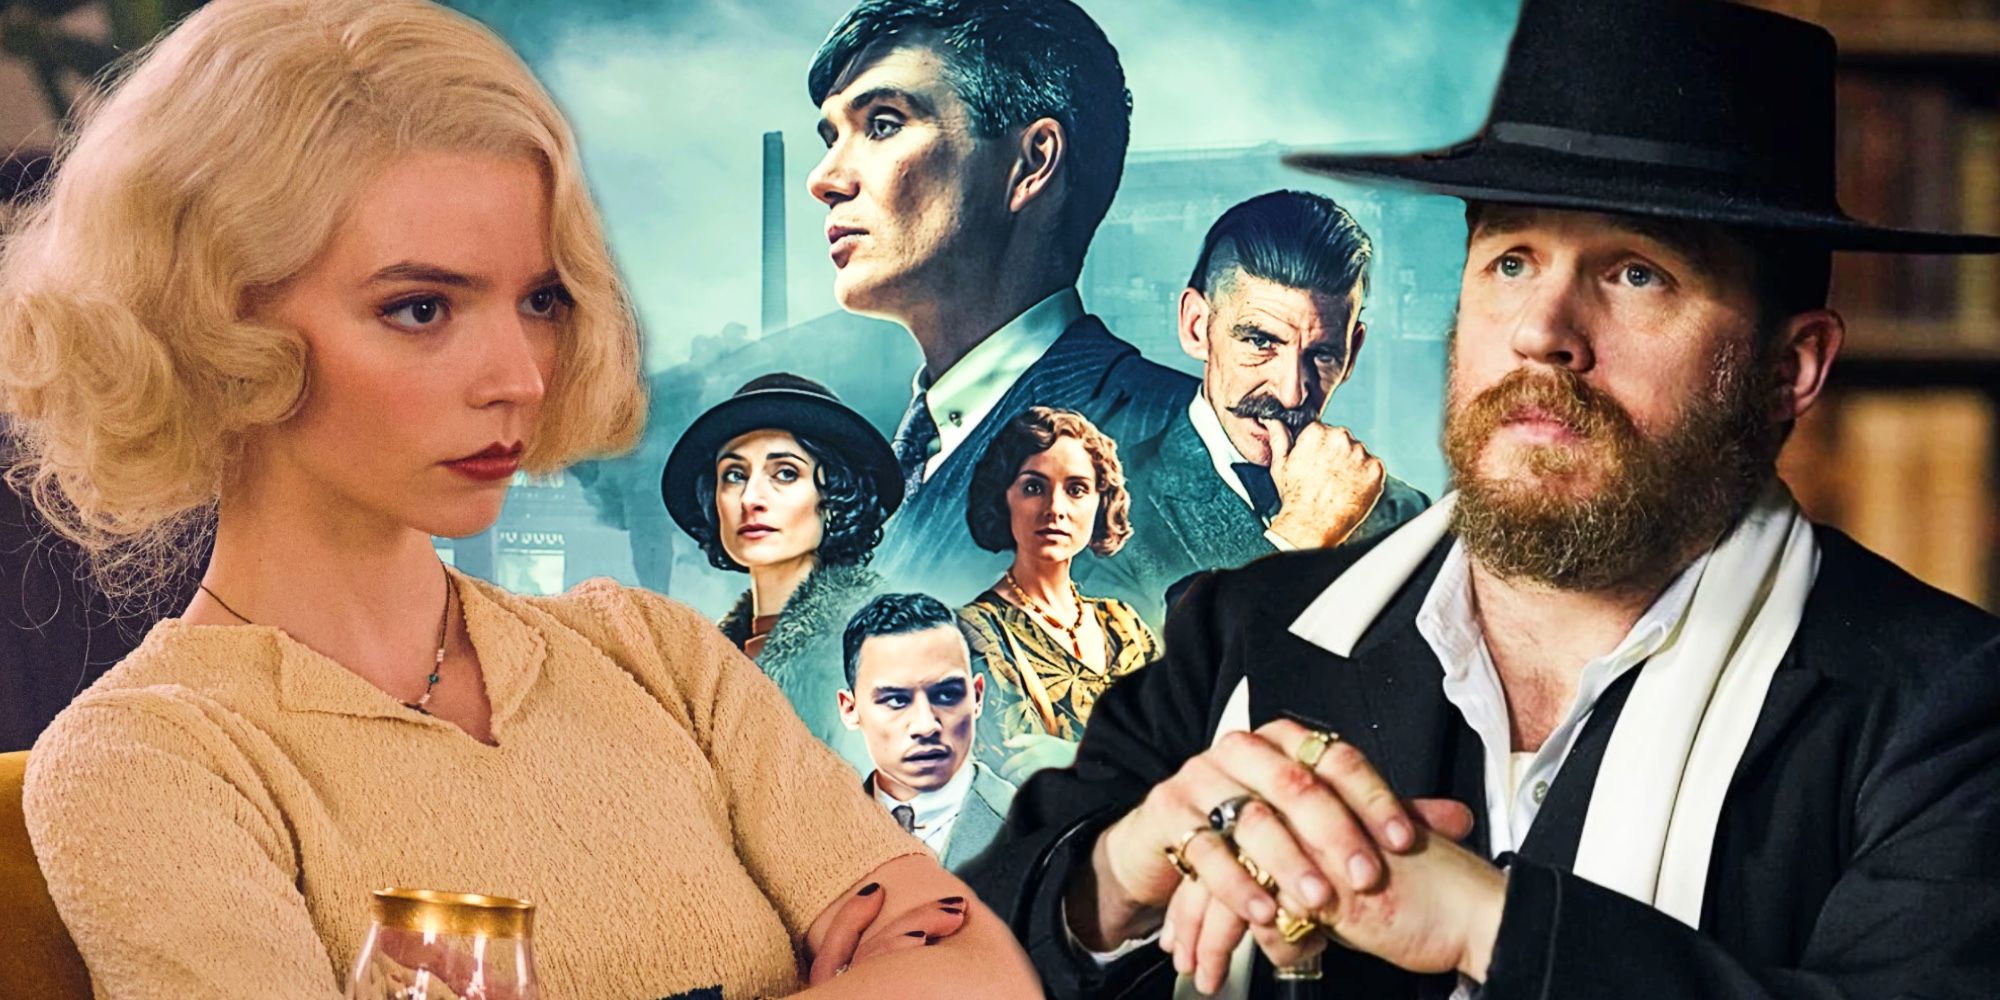 Peaky Blinders: which characters will get their own spin-offs